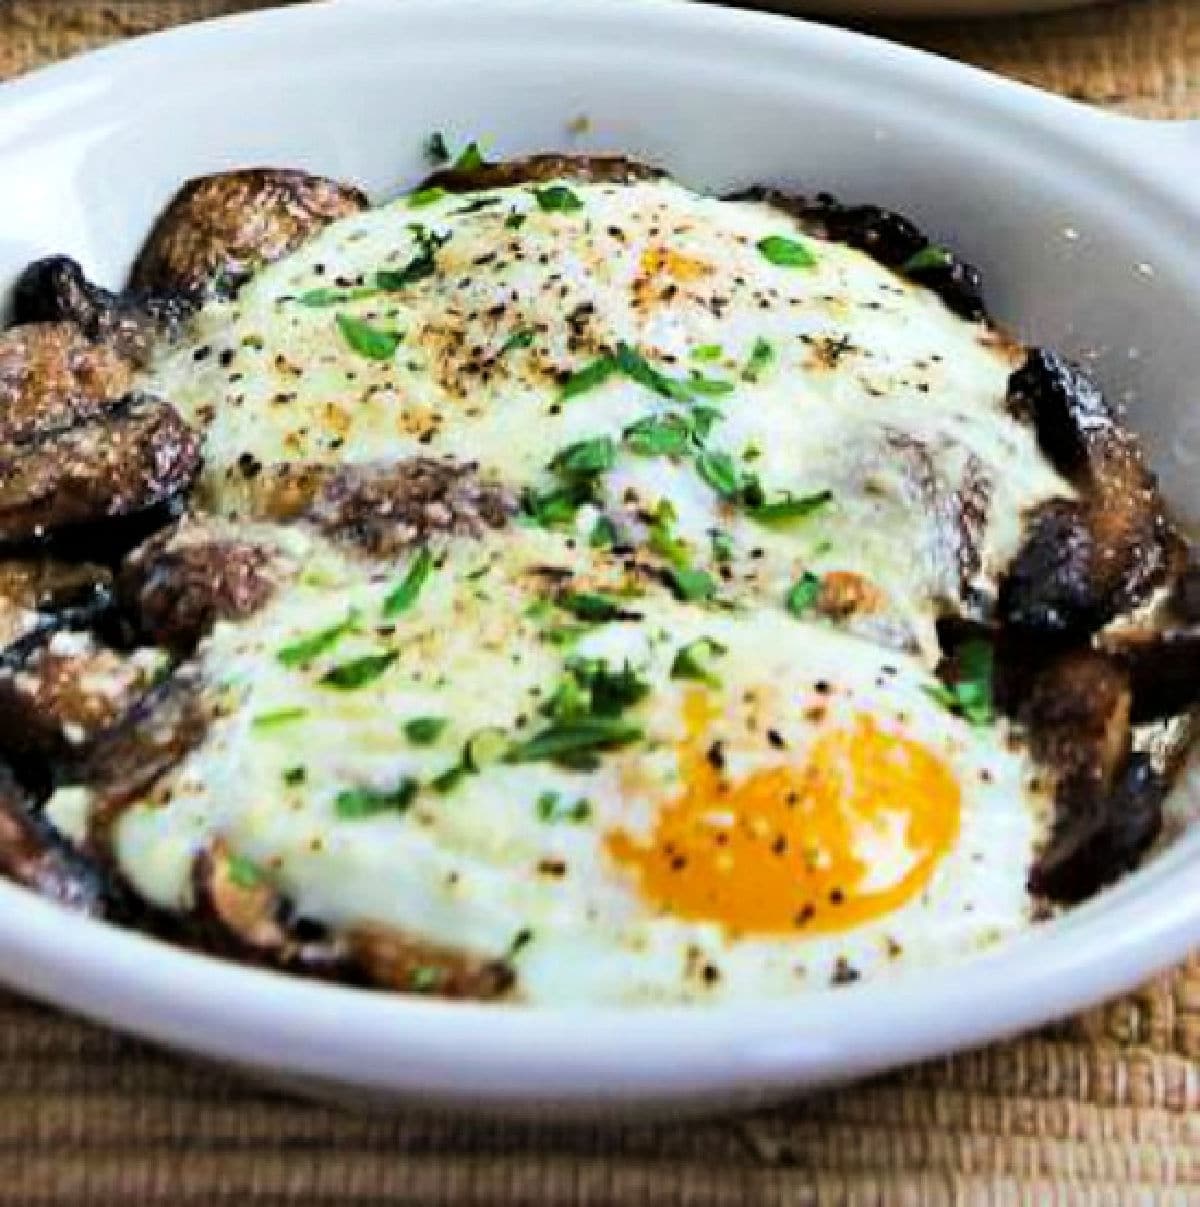 Square image for Baked Eggs with Mushrooms and Parmesan shown in gratin dishes.